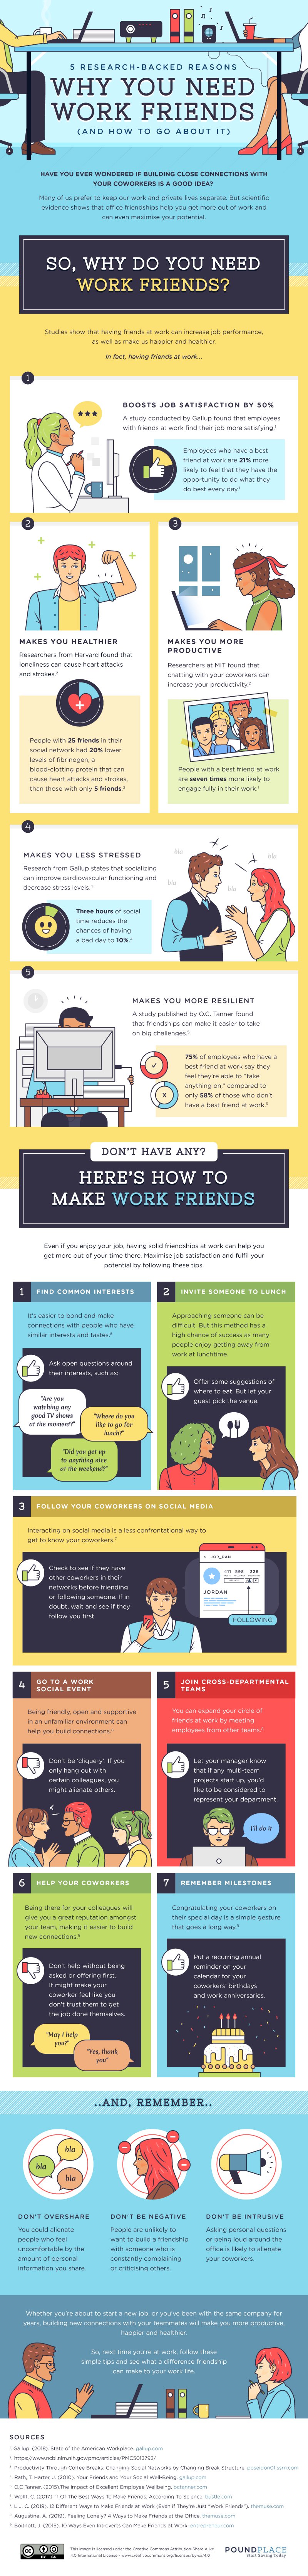 5-Research-back-reason-why-you-need-work-friends "width =" 800 "style =" width: 800px; "srcset =" https://blog.hubspot.com/hs-fs/hubfs/ 5-Research-back-reason-why-you-need-work-friends.jpg? Width = 400 & name = 5-Research-back-reason-why-you-need-work-friends.jpg 400w, https: // blog .hubspot.com / hs-fs / hubfs / 5-Research-back-reason-why-you-need-work-friends.jpg? width = 800 & name = 5-Research-back-reason-why-you-need-work -friends.jpg 800w, https://blog.hubspot.com/hs-fs/hubfs/5-research-backed-reasons-why-you-need-work-friends.jpg?ference=1200&name=5-research- ủng hộ-reason-why-you-need-work-friends.jpg 1200w, https://blog.hubspot.com/hs-fs/hubfs/5-research-backed-reasons-why-you-need-work-friends .jpg? width = 1600 & name = 5-Research-back-reason-why-you-need-work-friends.jpg 1600w, https://blog.hubspot.com/hs-fs/hubfs/5-research-backed- reason-why-you-need-work-friends.jpg? width = 2000 & name = 5-Research-back-reason-why-you-need-work-friends.jpg 2000w, https://blog.hubspot.com/hs -fs / hubfs / 5-nghiên cứu-b acked-reason-why-you-need-work-friends.jpg? width = 2400 & name = 5-Research-back-reason-why-you-need-work-friends.jpg 2400w "size =" (max-width: 800px ) 100vw, 800px